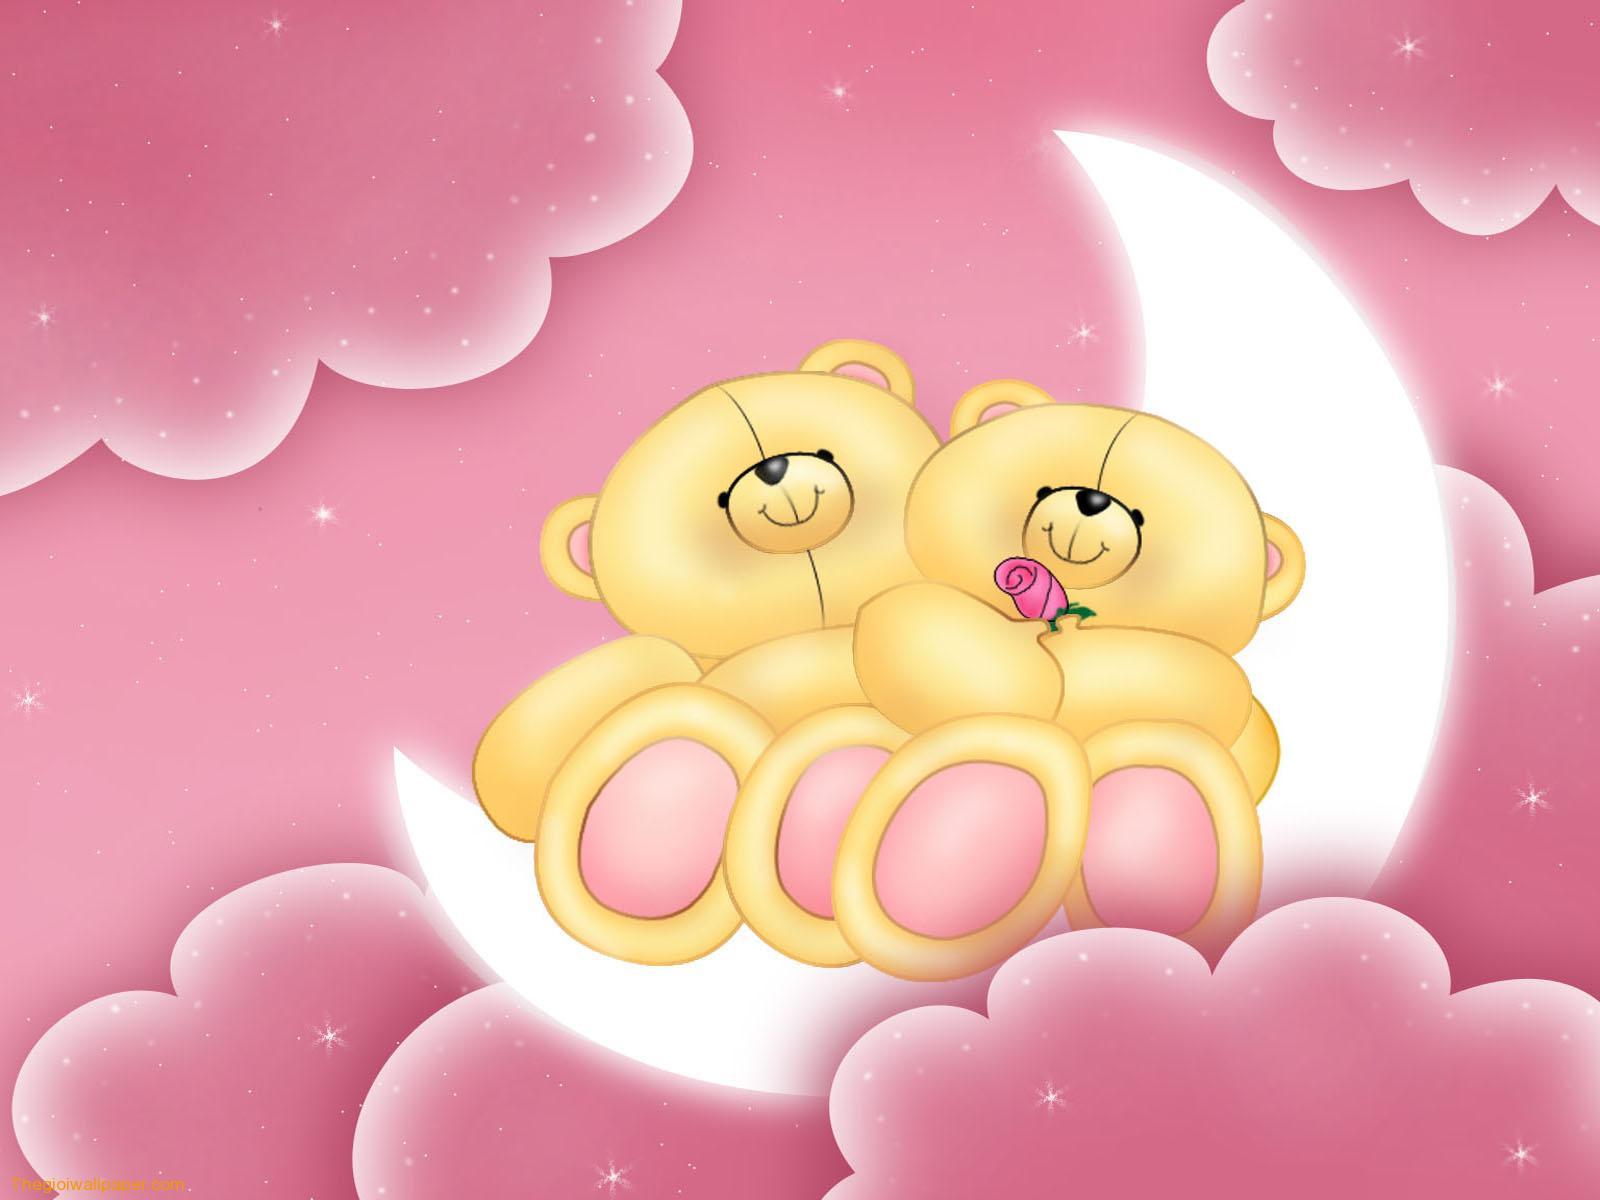 Cute Couples wallpaper free download for Android